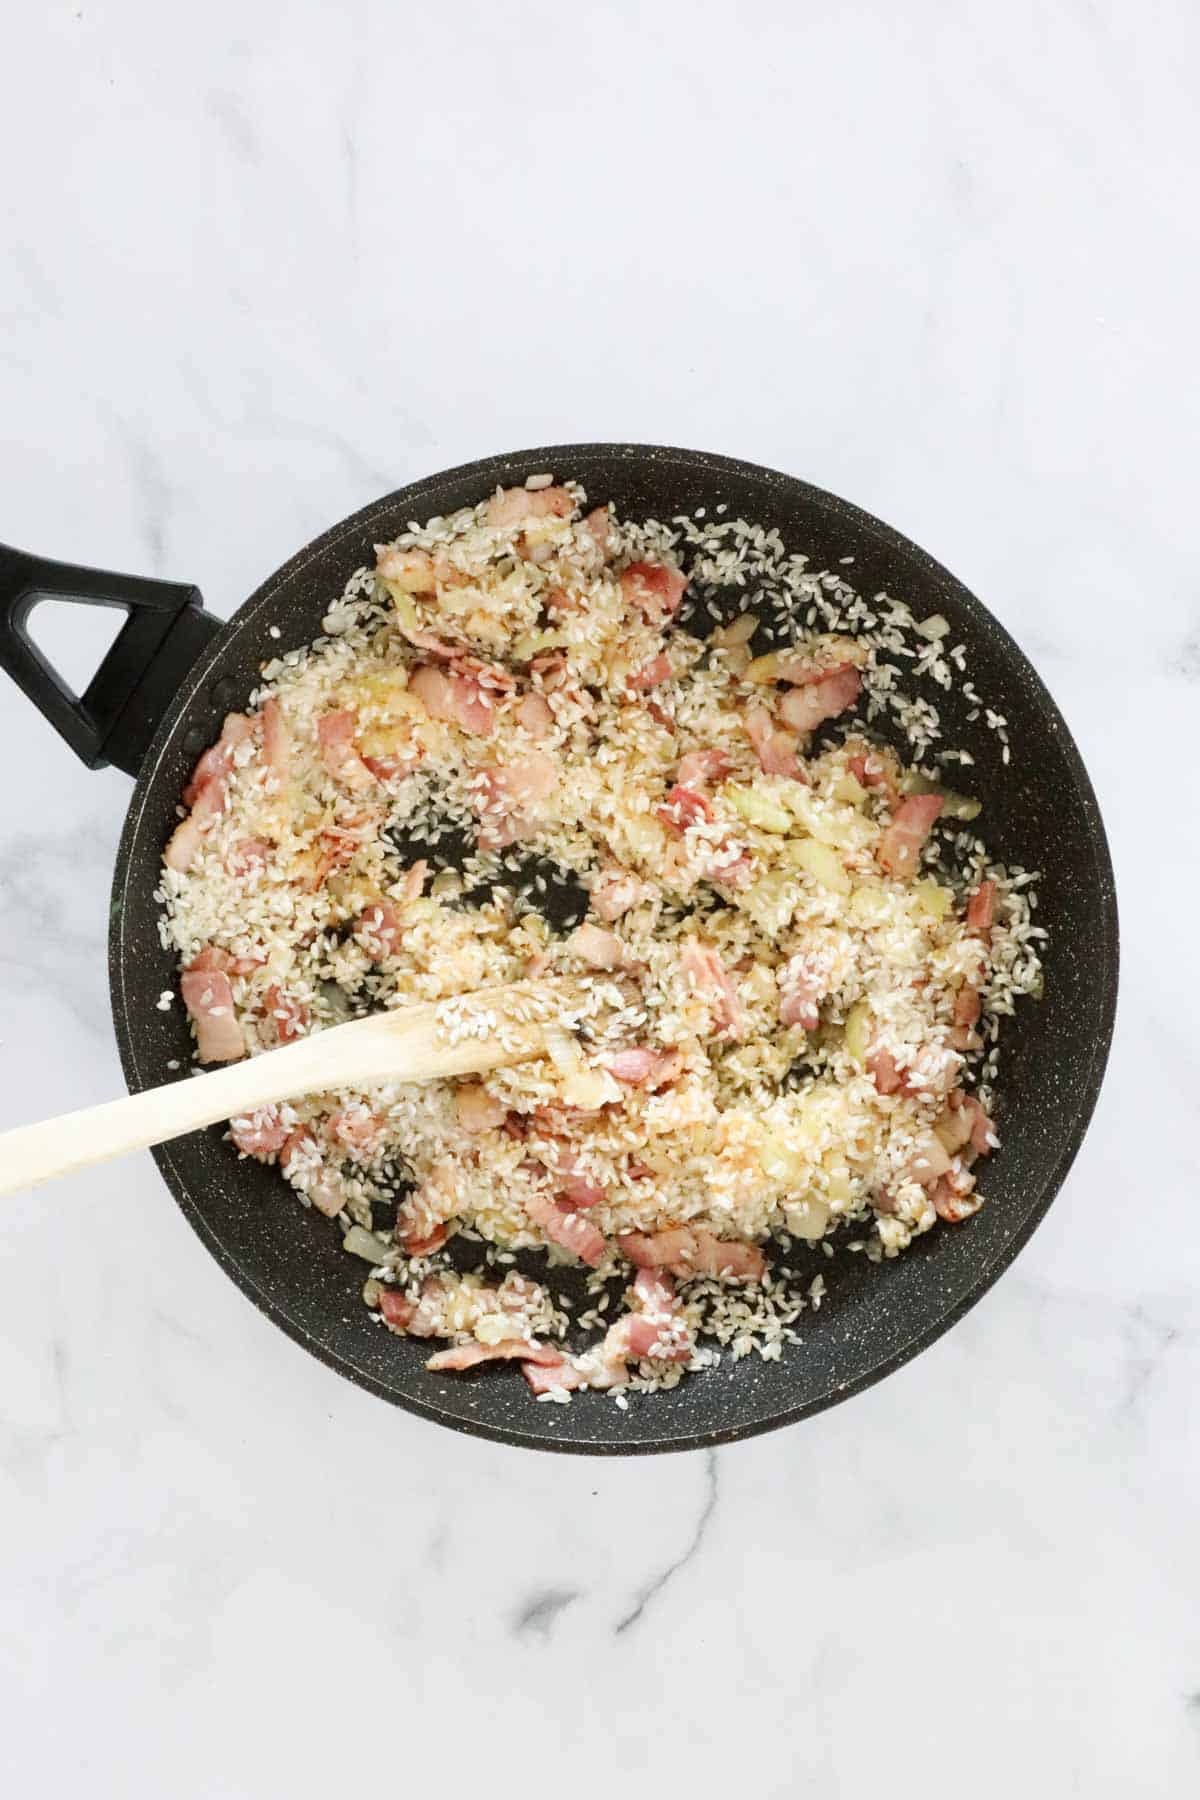 Arborio rice added to the cooked bacon and onion in the frying pan.